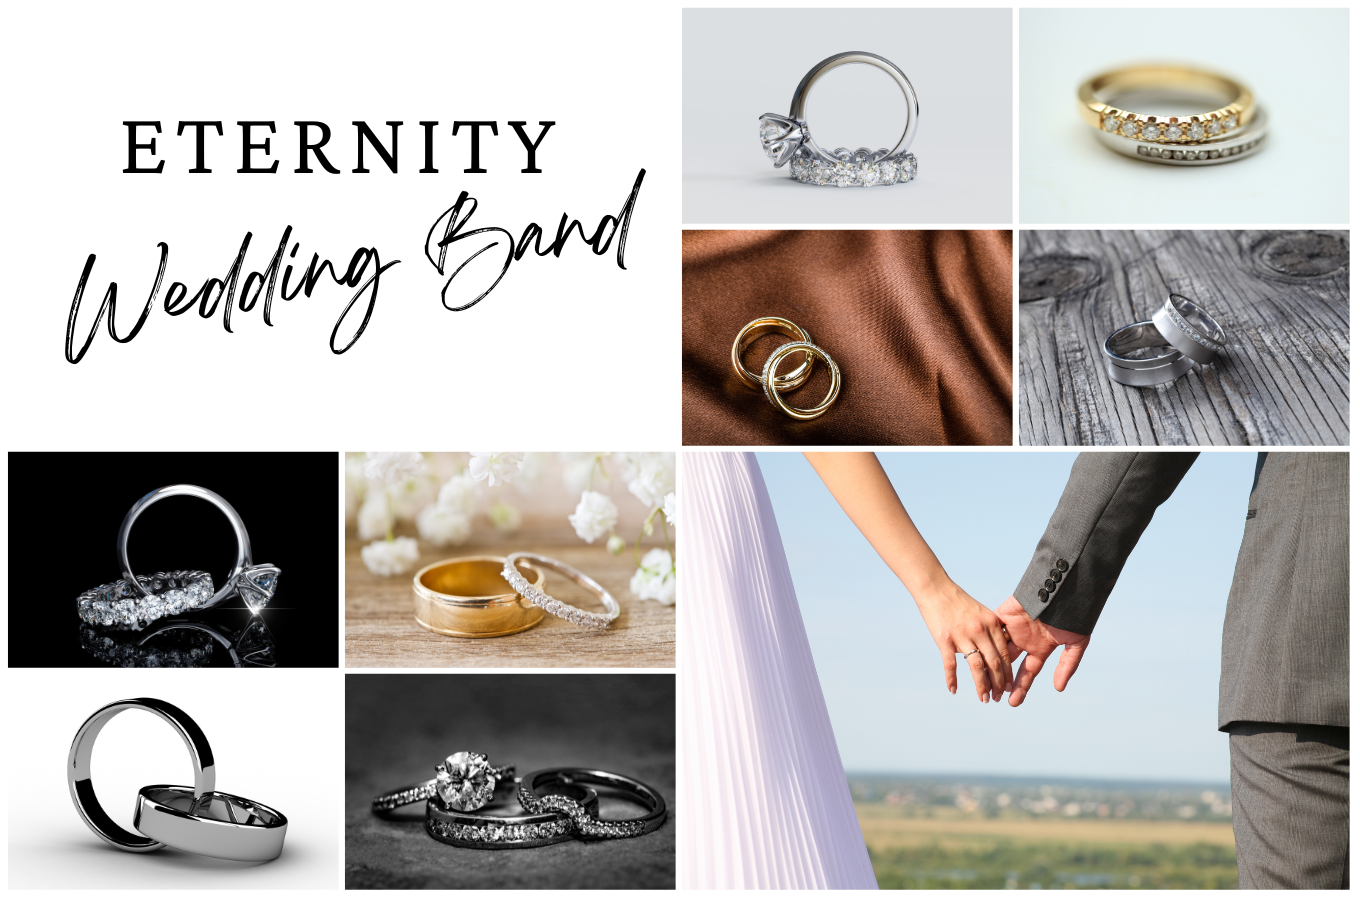 Tips to Style the Eternity Jewelry